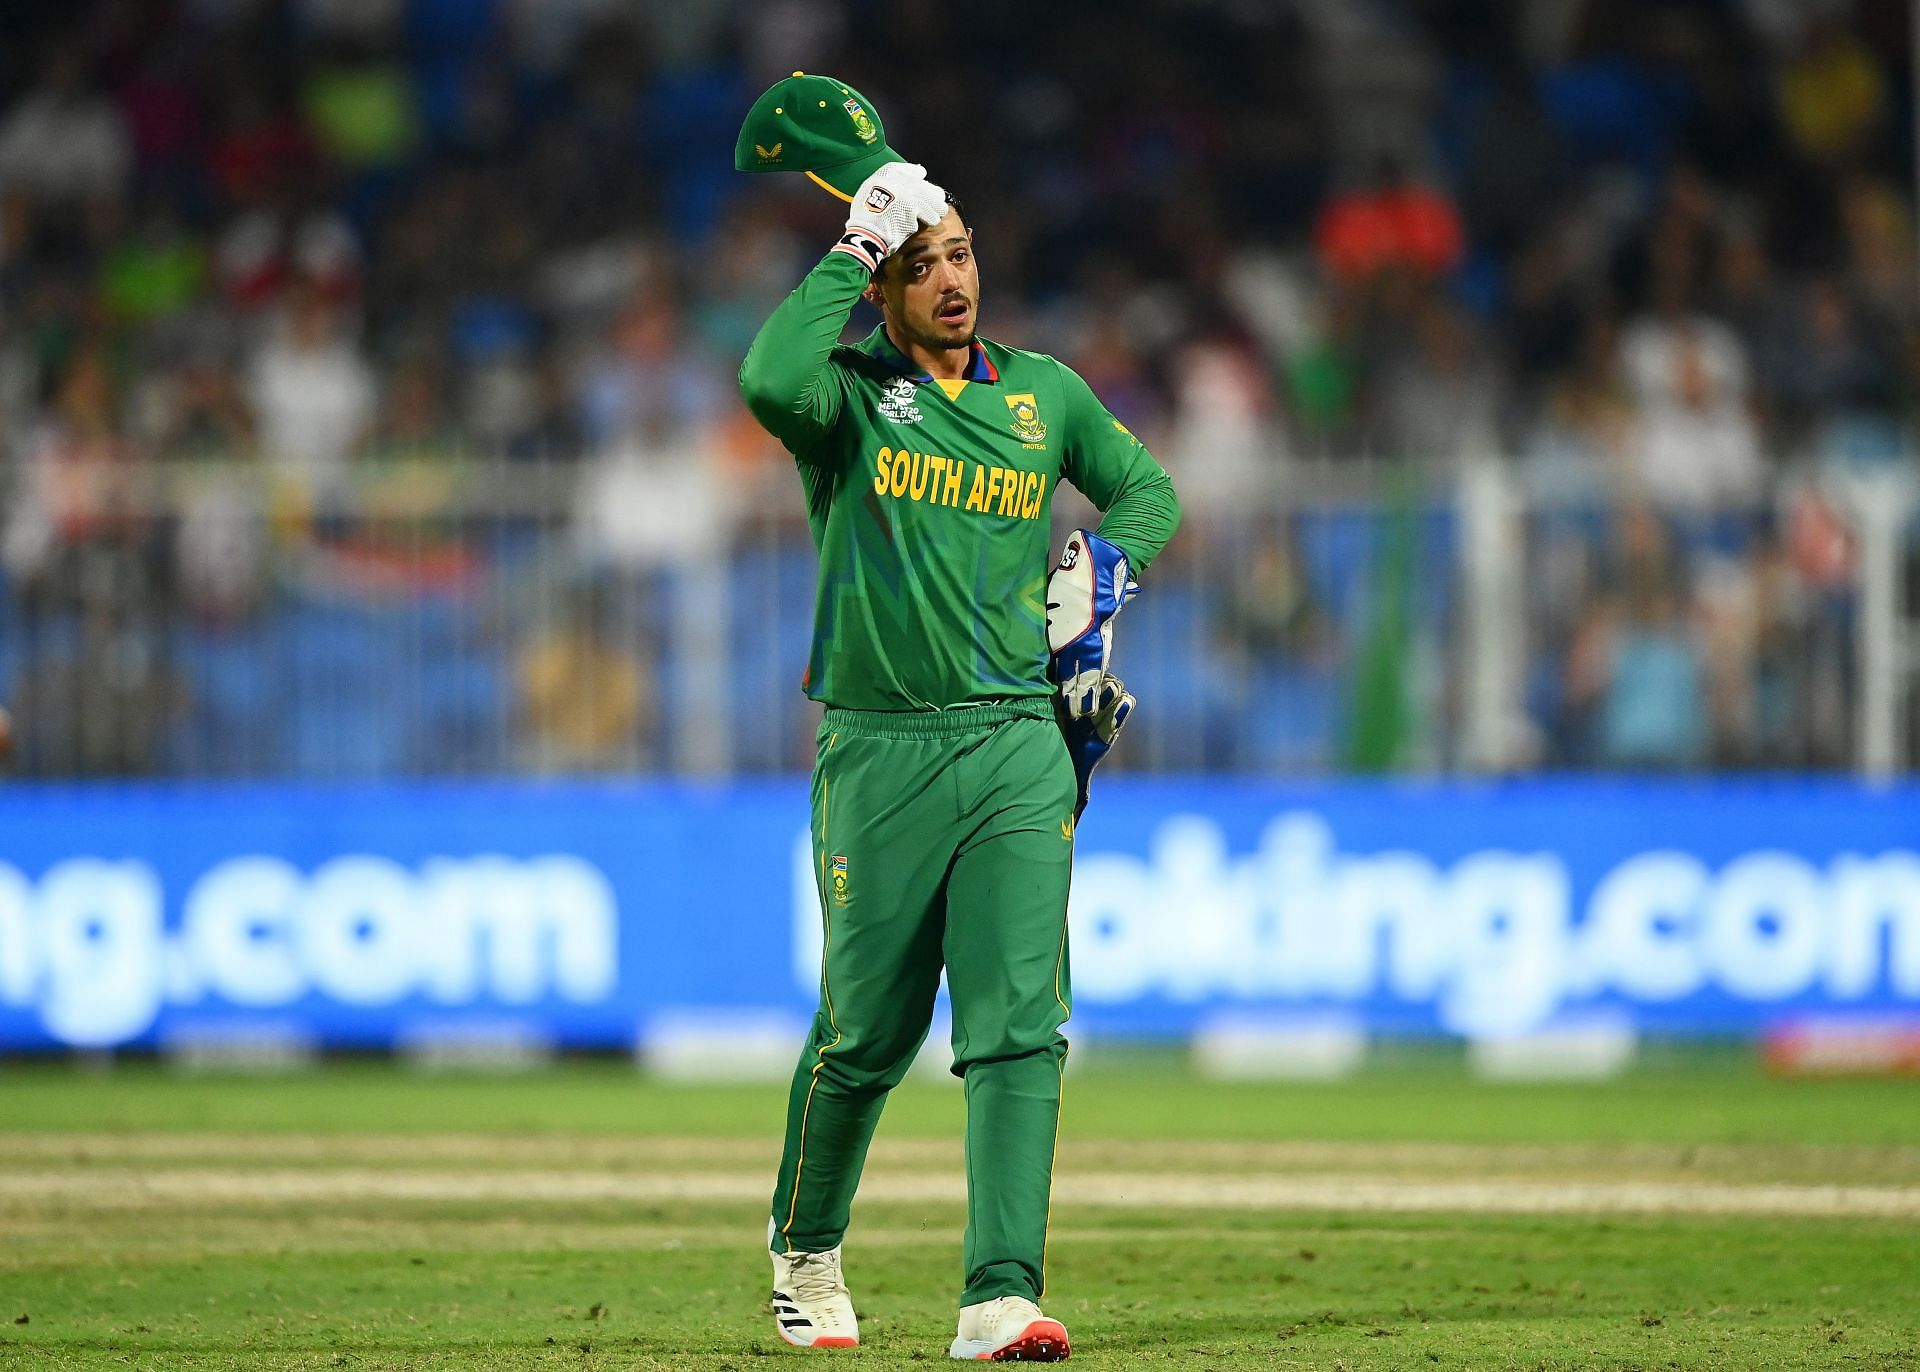 Quinton de Kock will look to step up for his side once again in their next match.